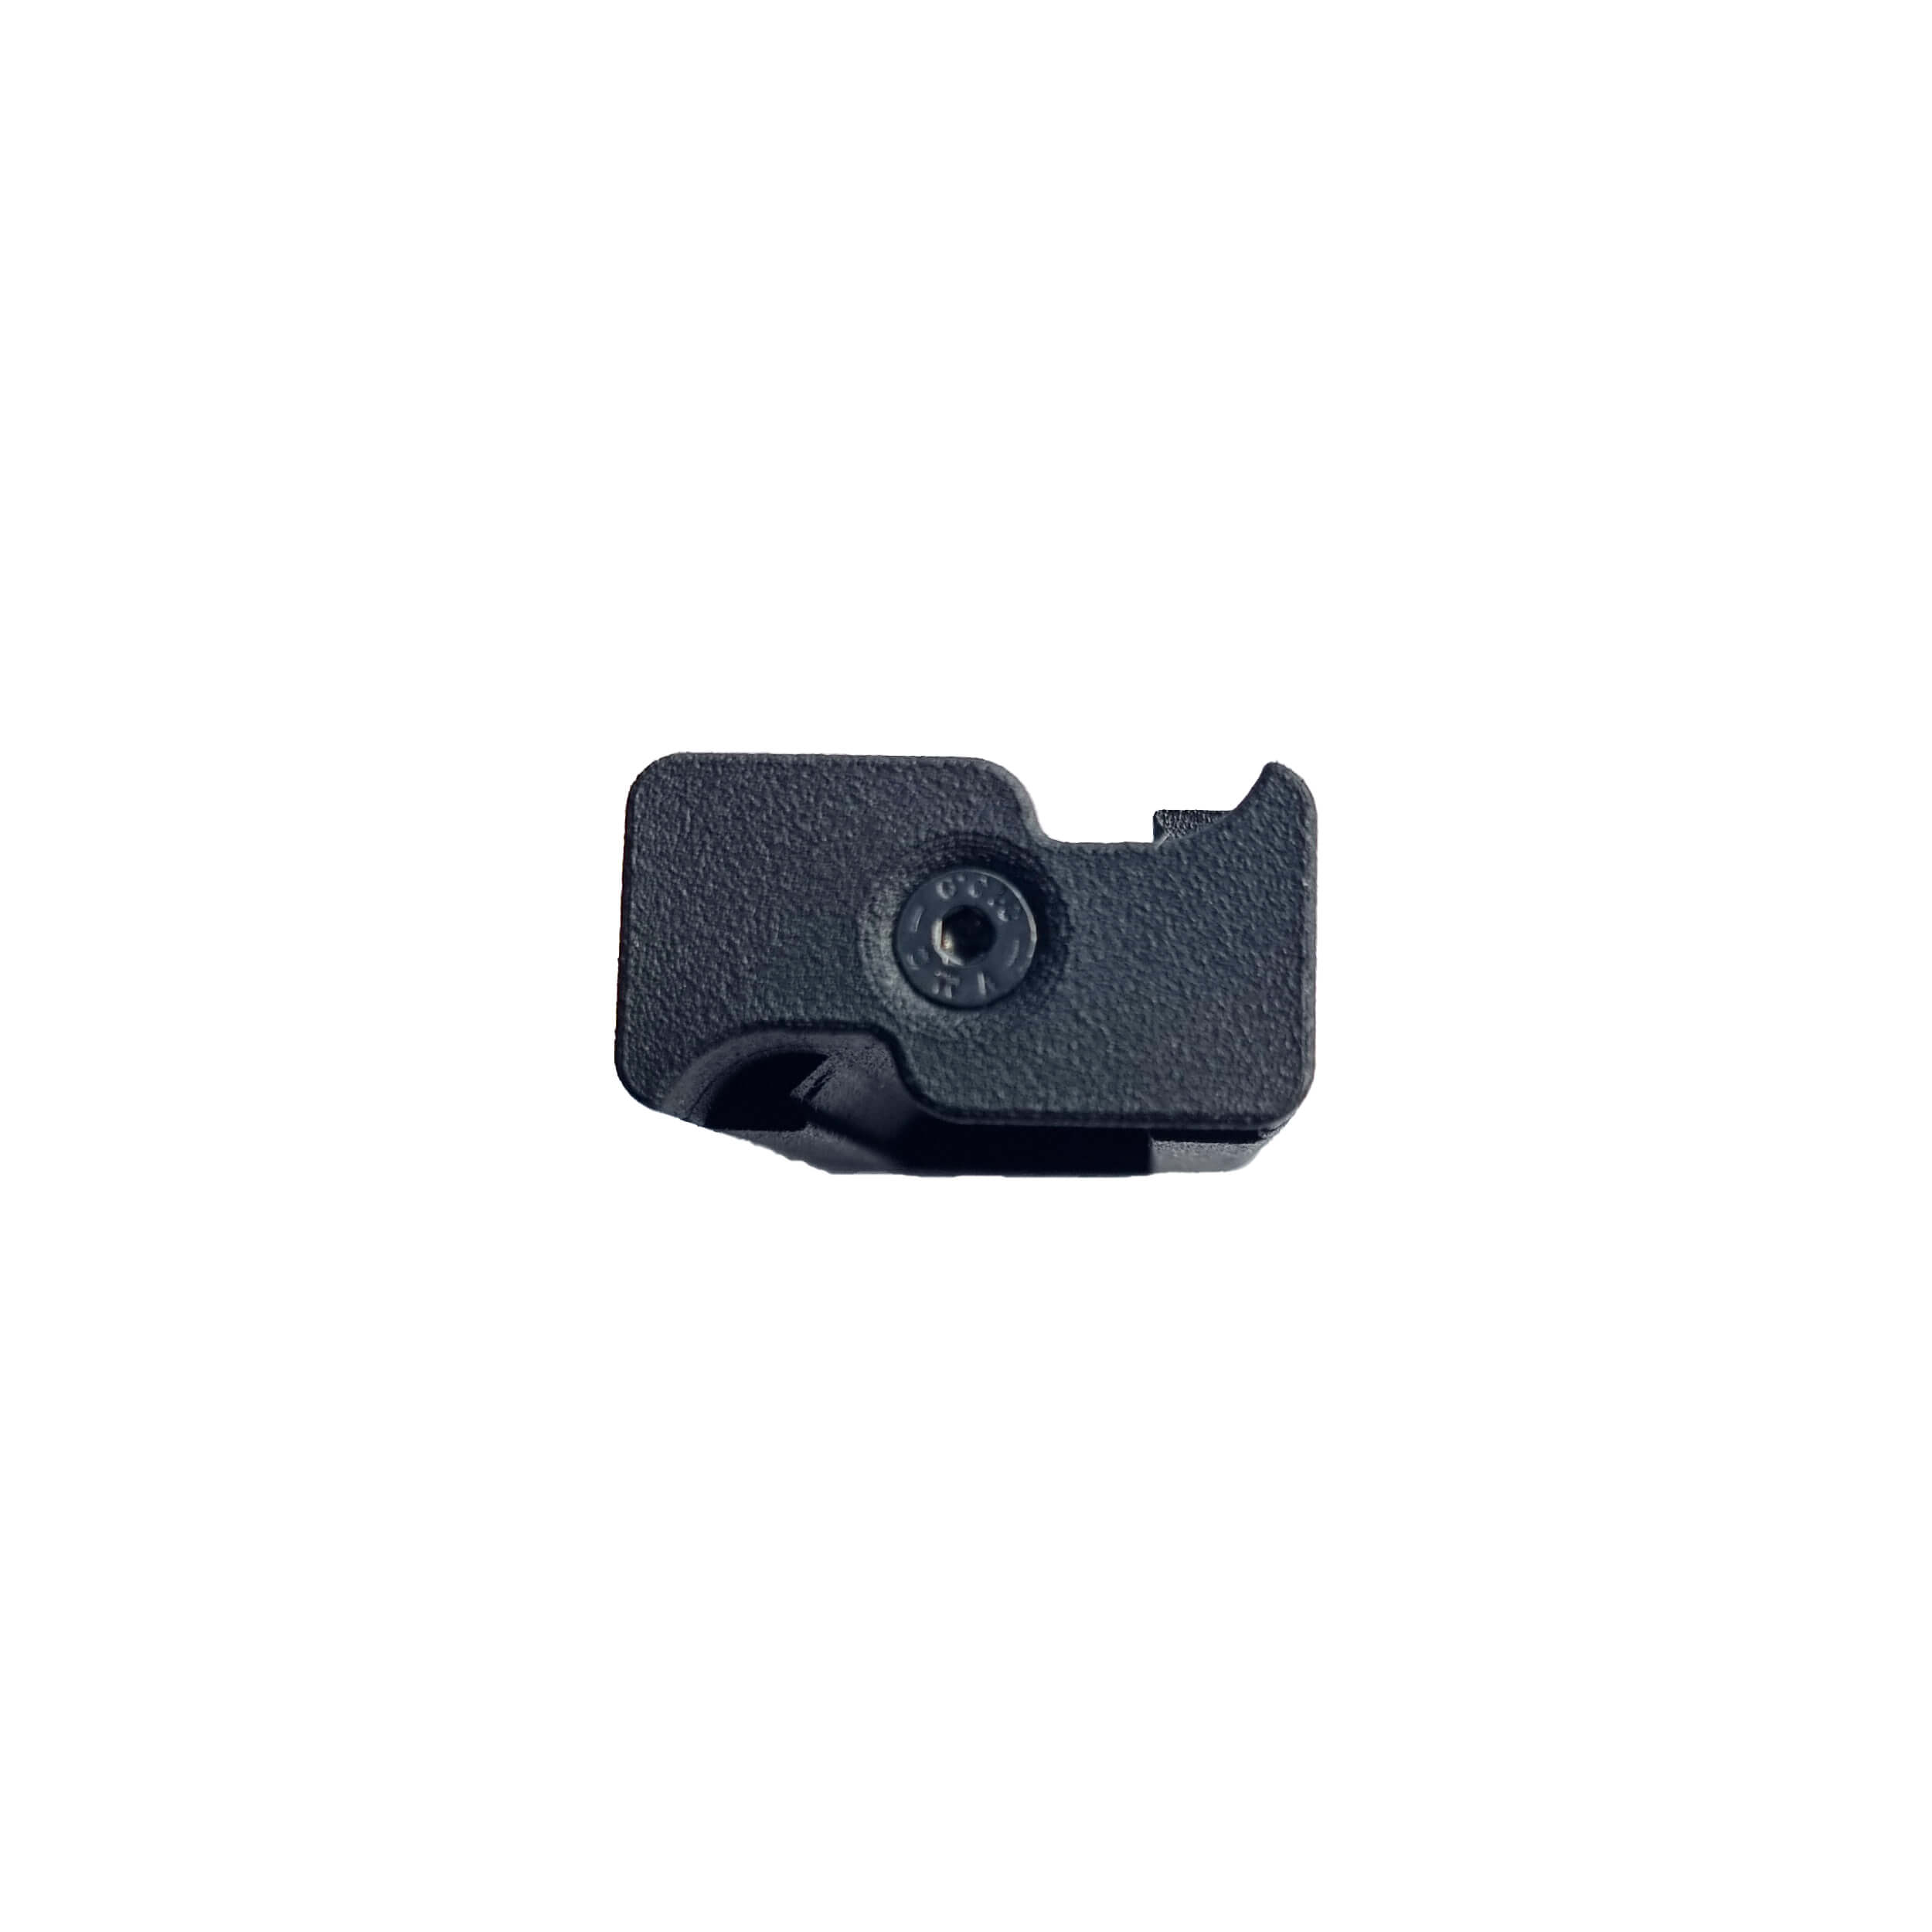 ISSProtectiontrade Dual Magazine Coupler for FAB Defense VZ58 10 Round Magazines